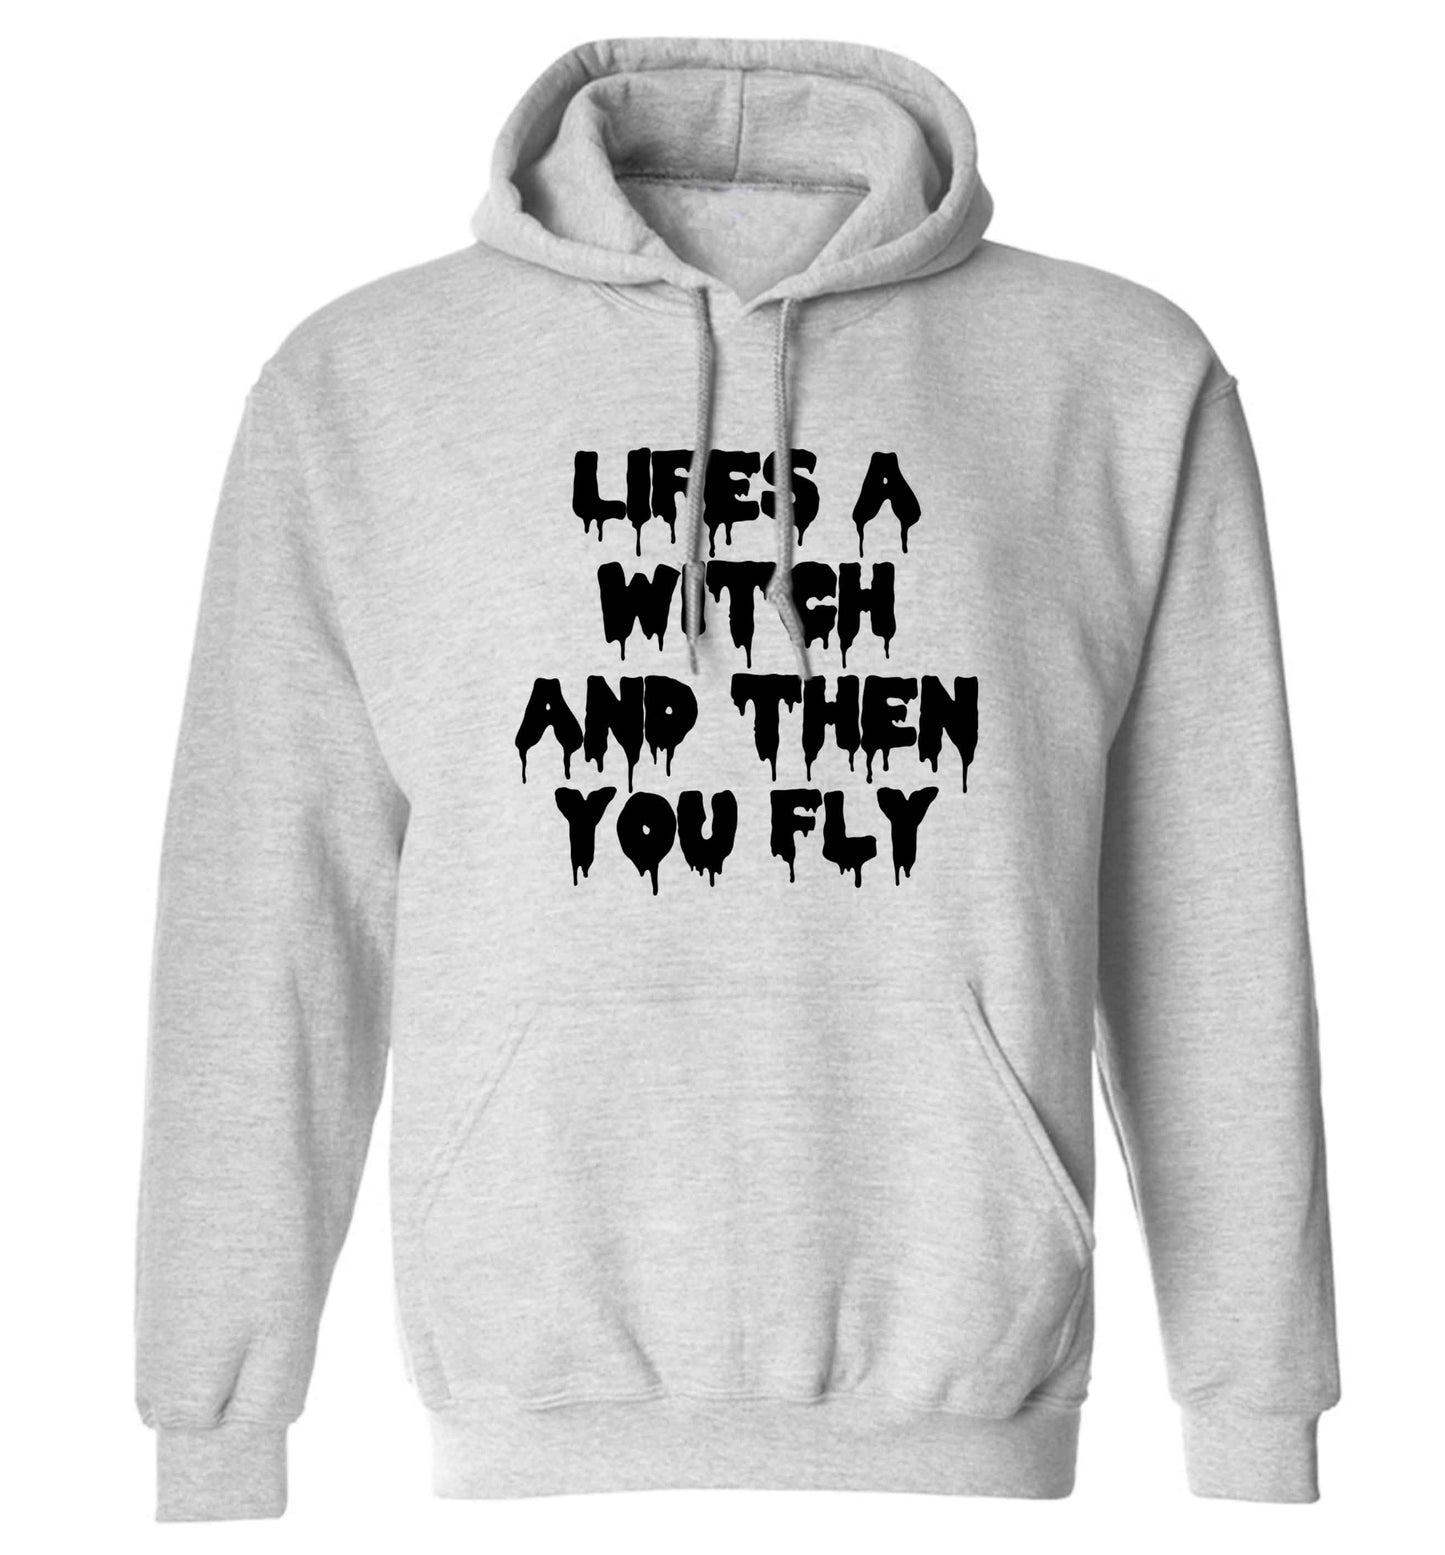 Life's a witch and then you fly adults unisex grey hoodie 2XL